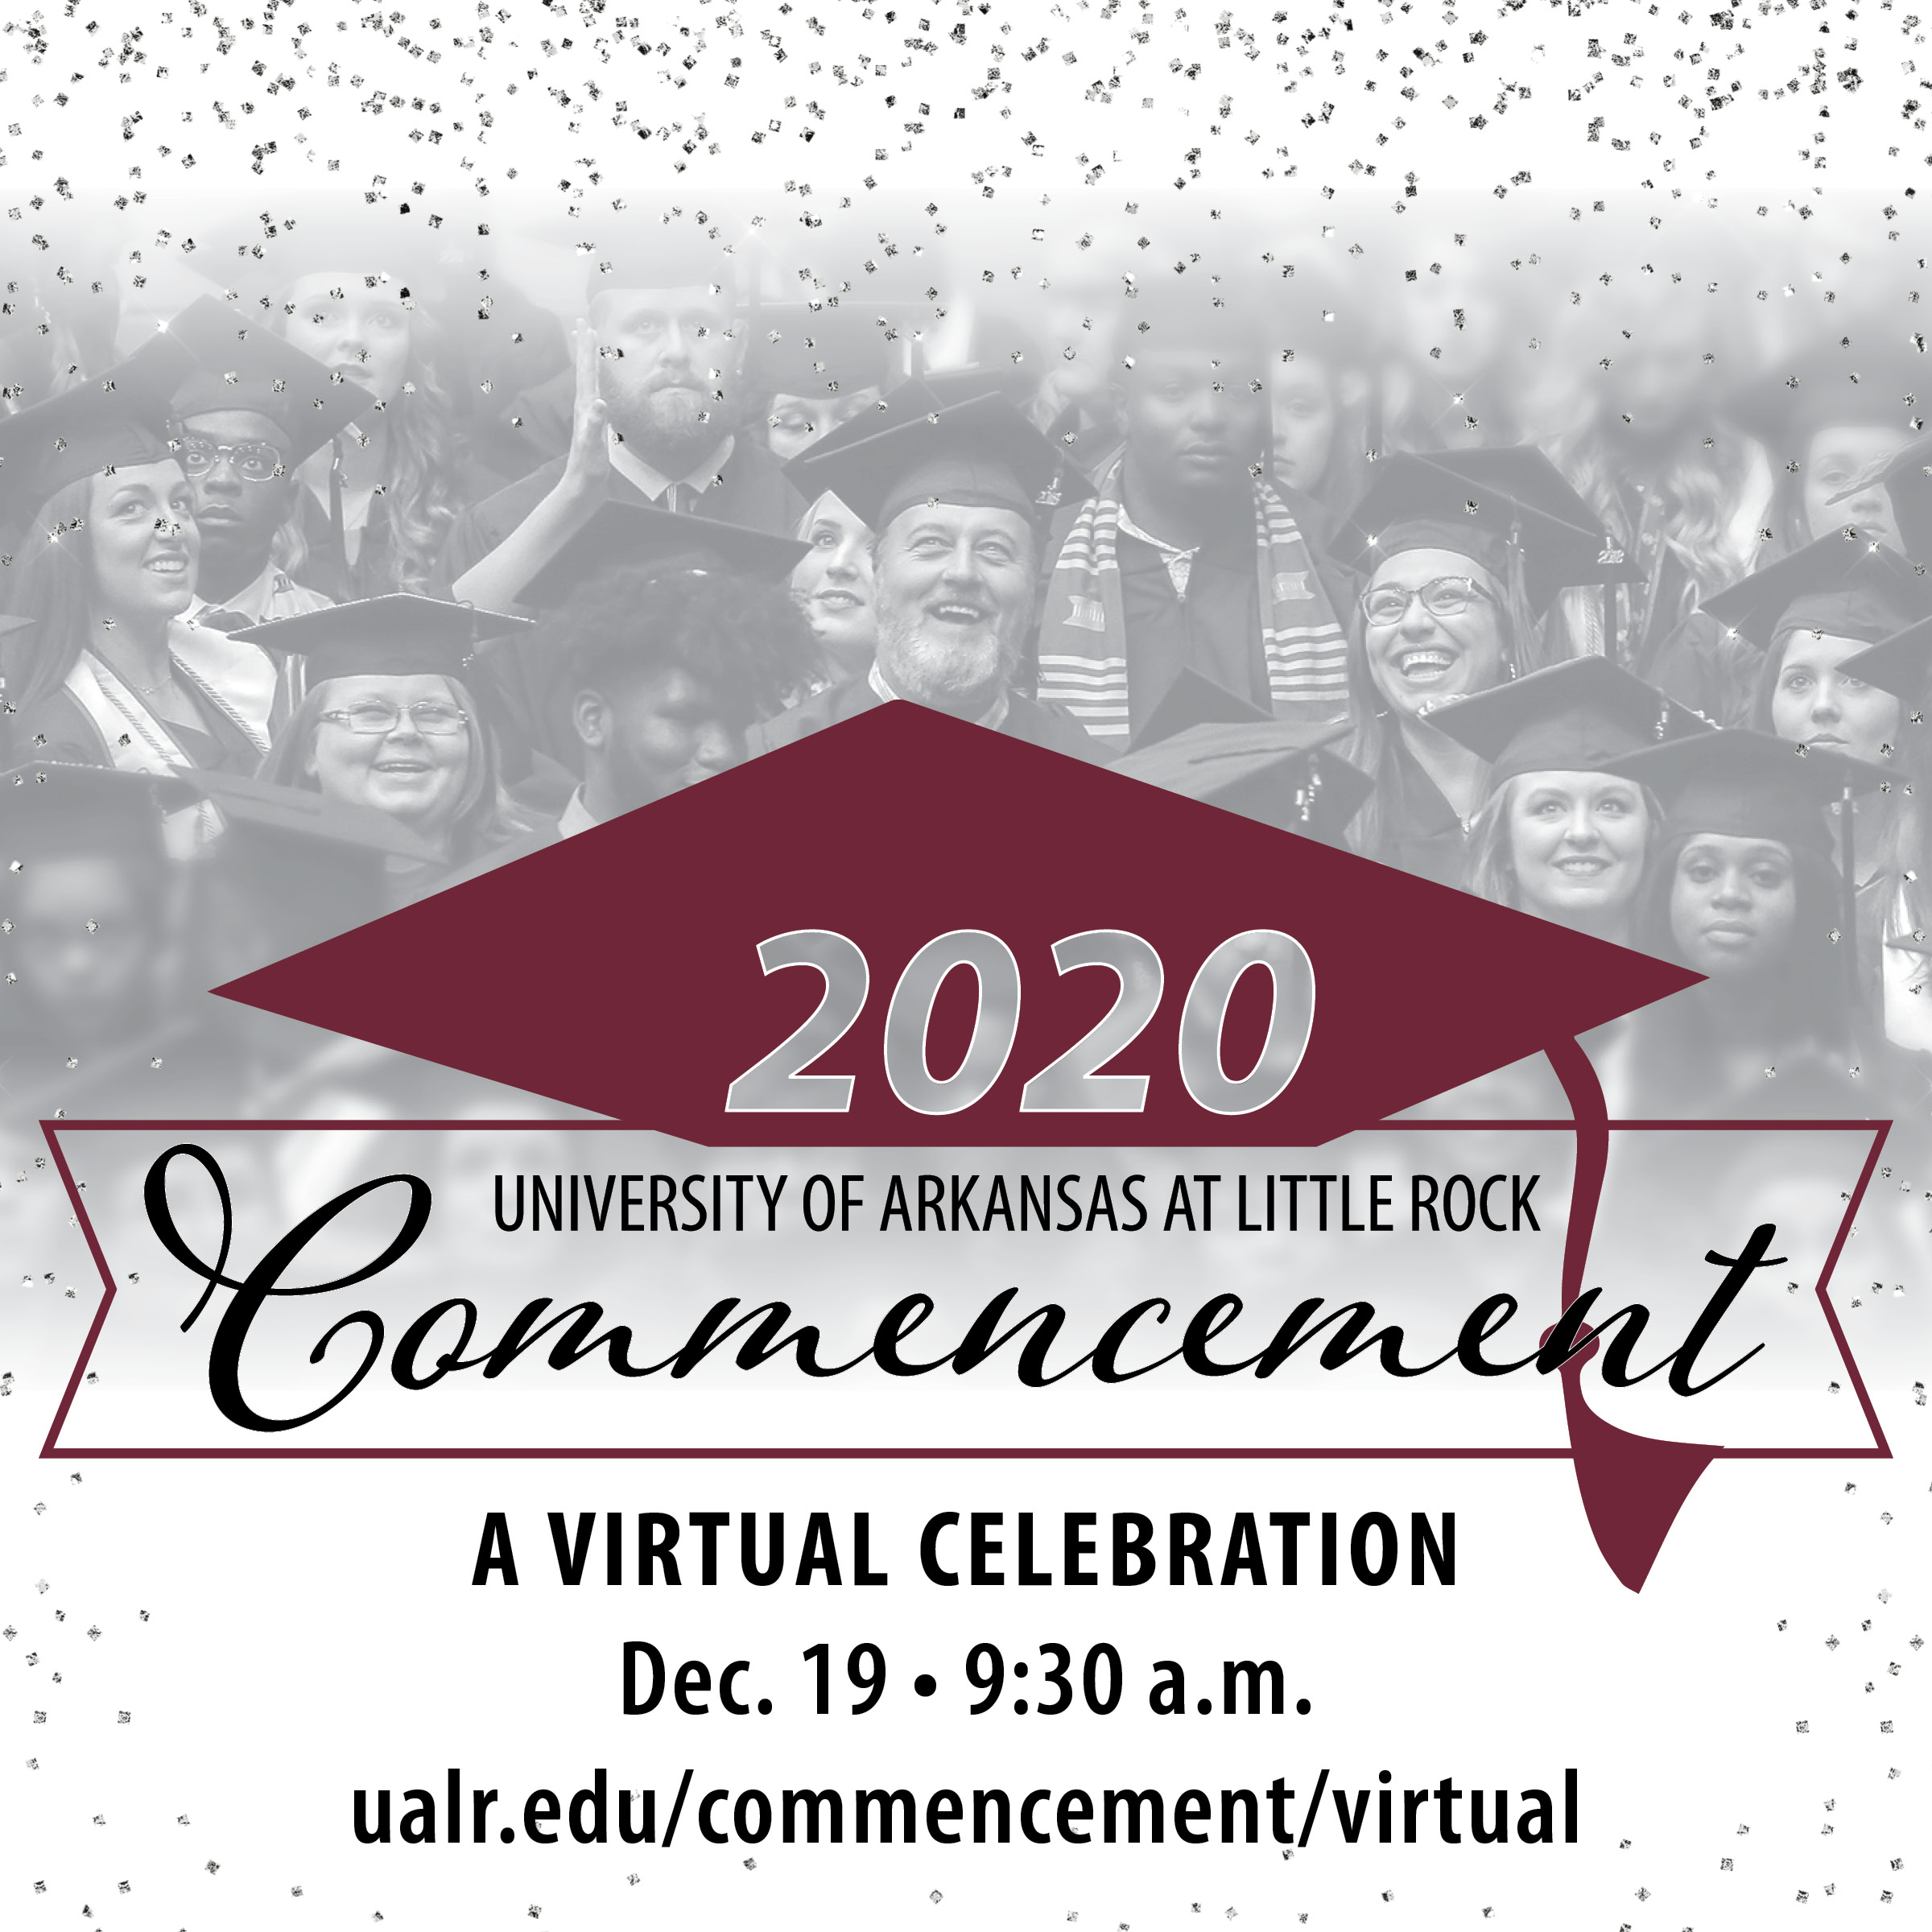 The virtual commencement celebration will begin at 9:30 a.m. on Dec. 19.